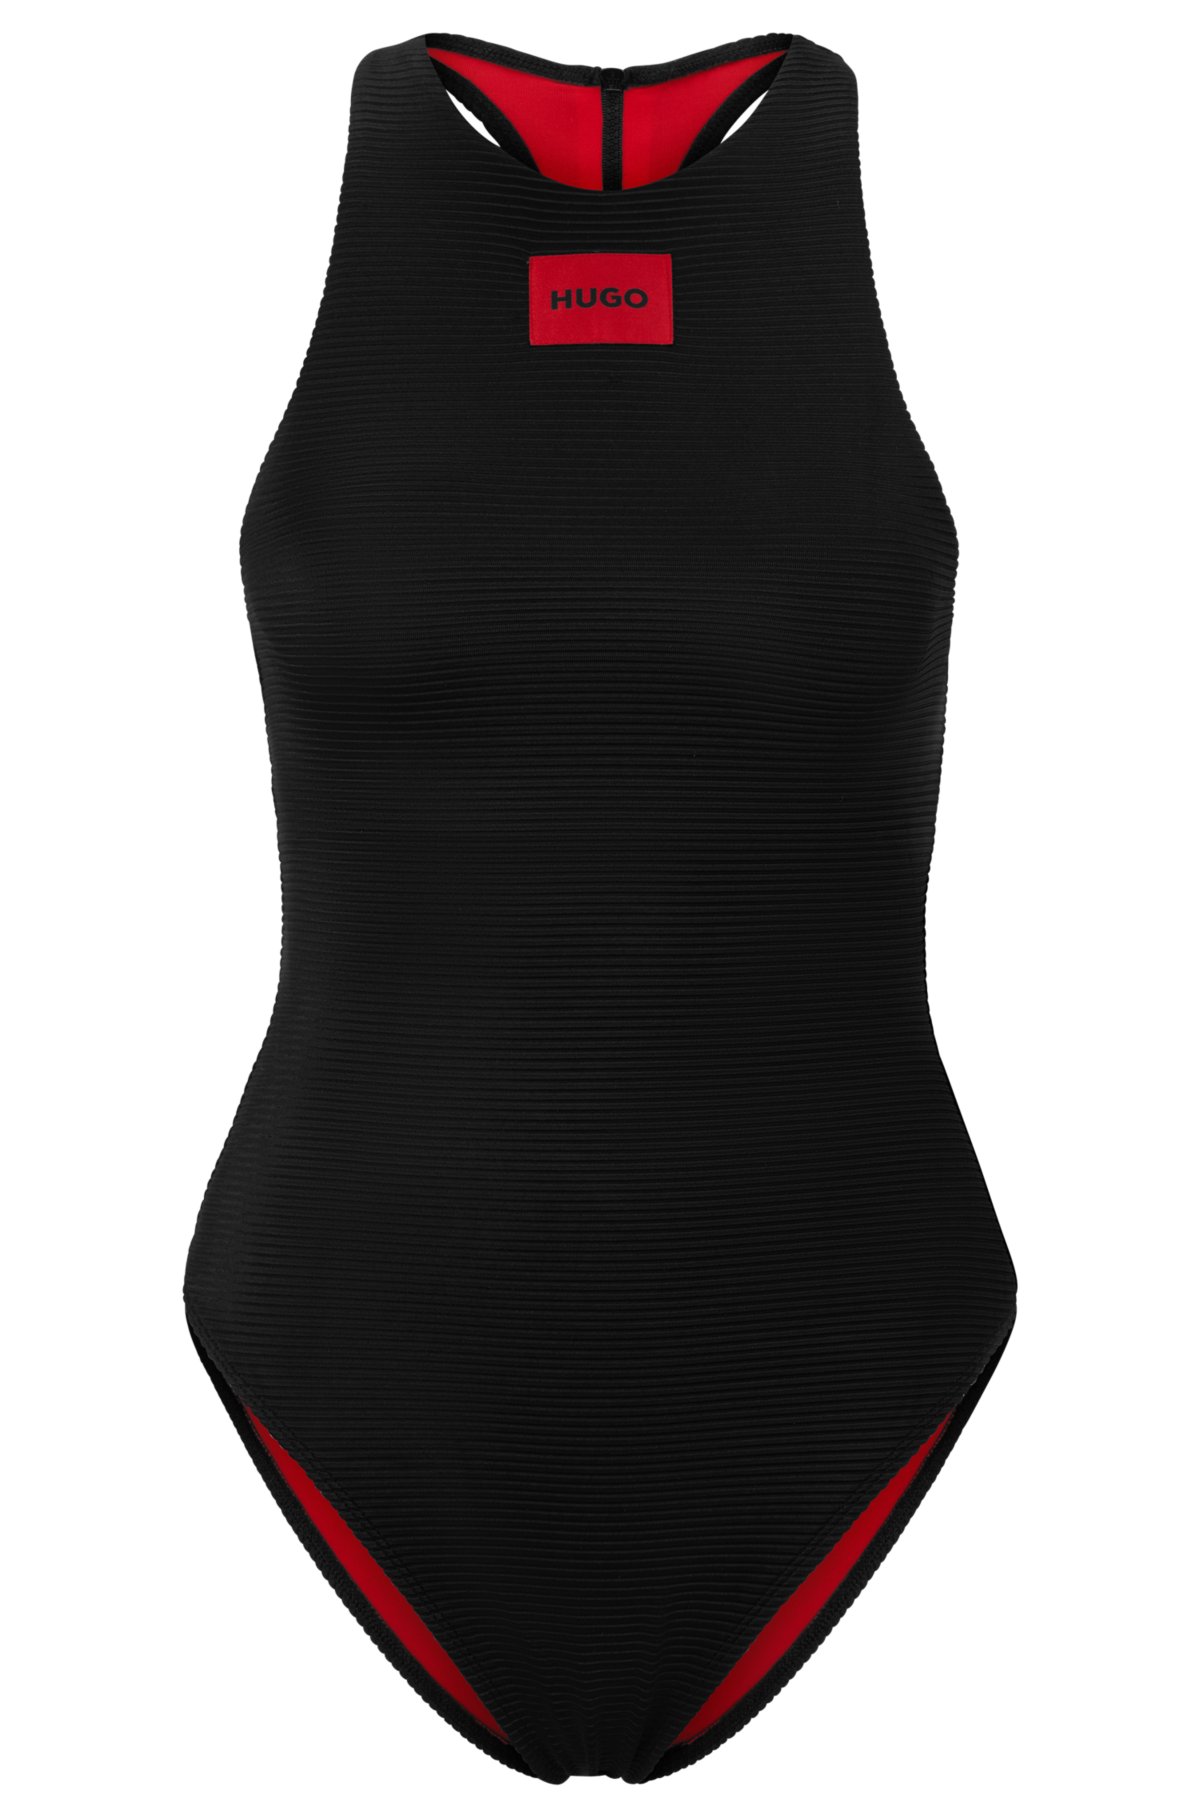 HUGO - Ribbed red swimsuit with label logo racer-back